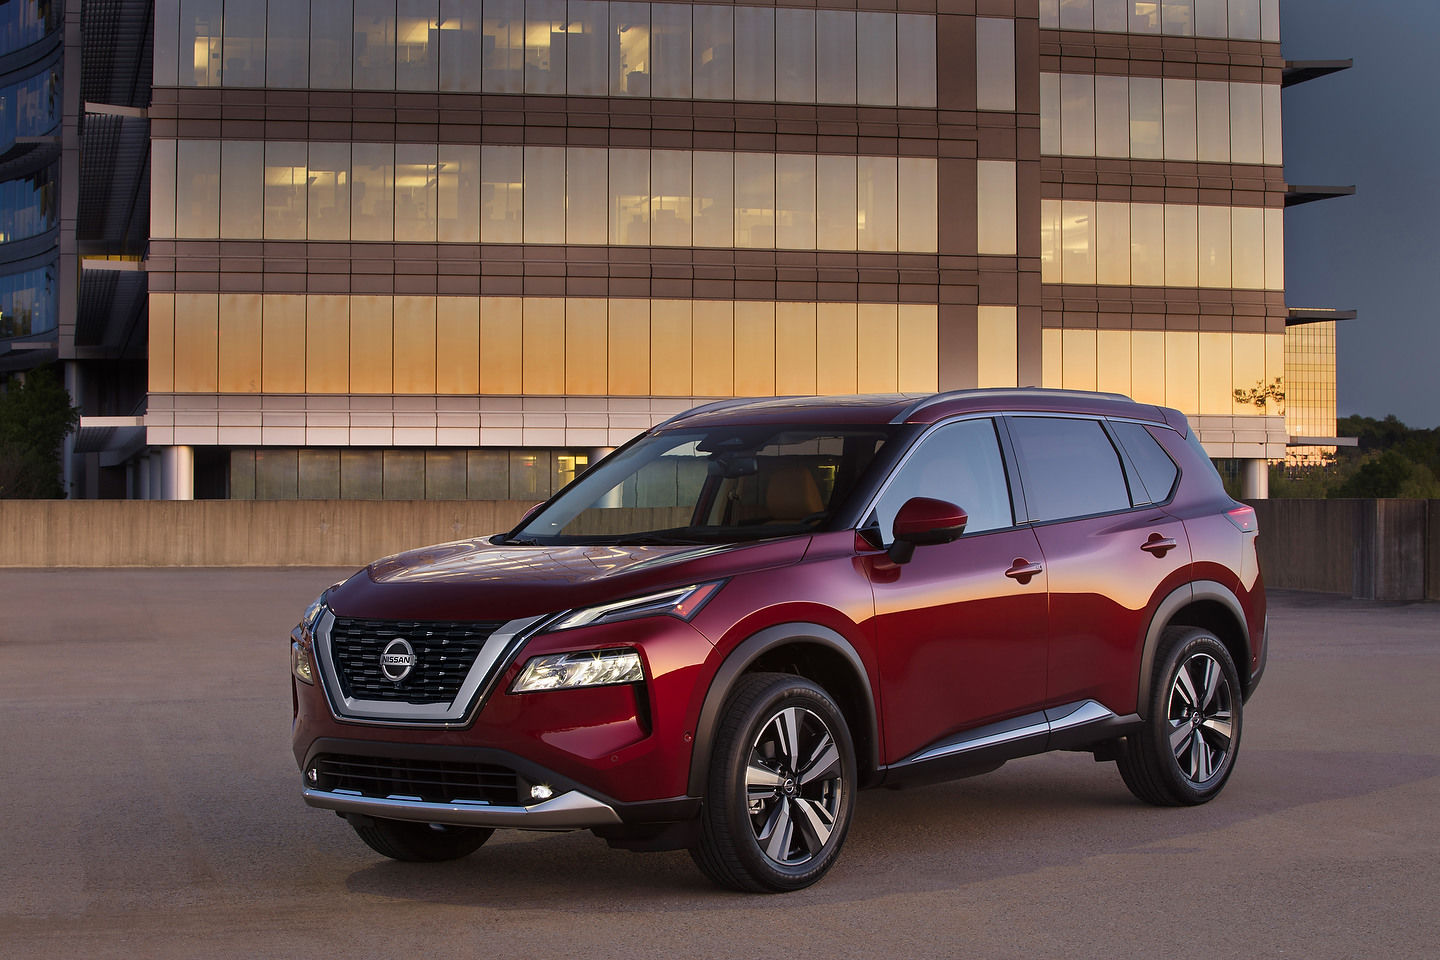 2022 Nissan Rogue gets new 1.5-litre 3-cylinder turbo engine